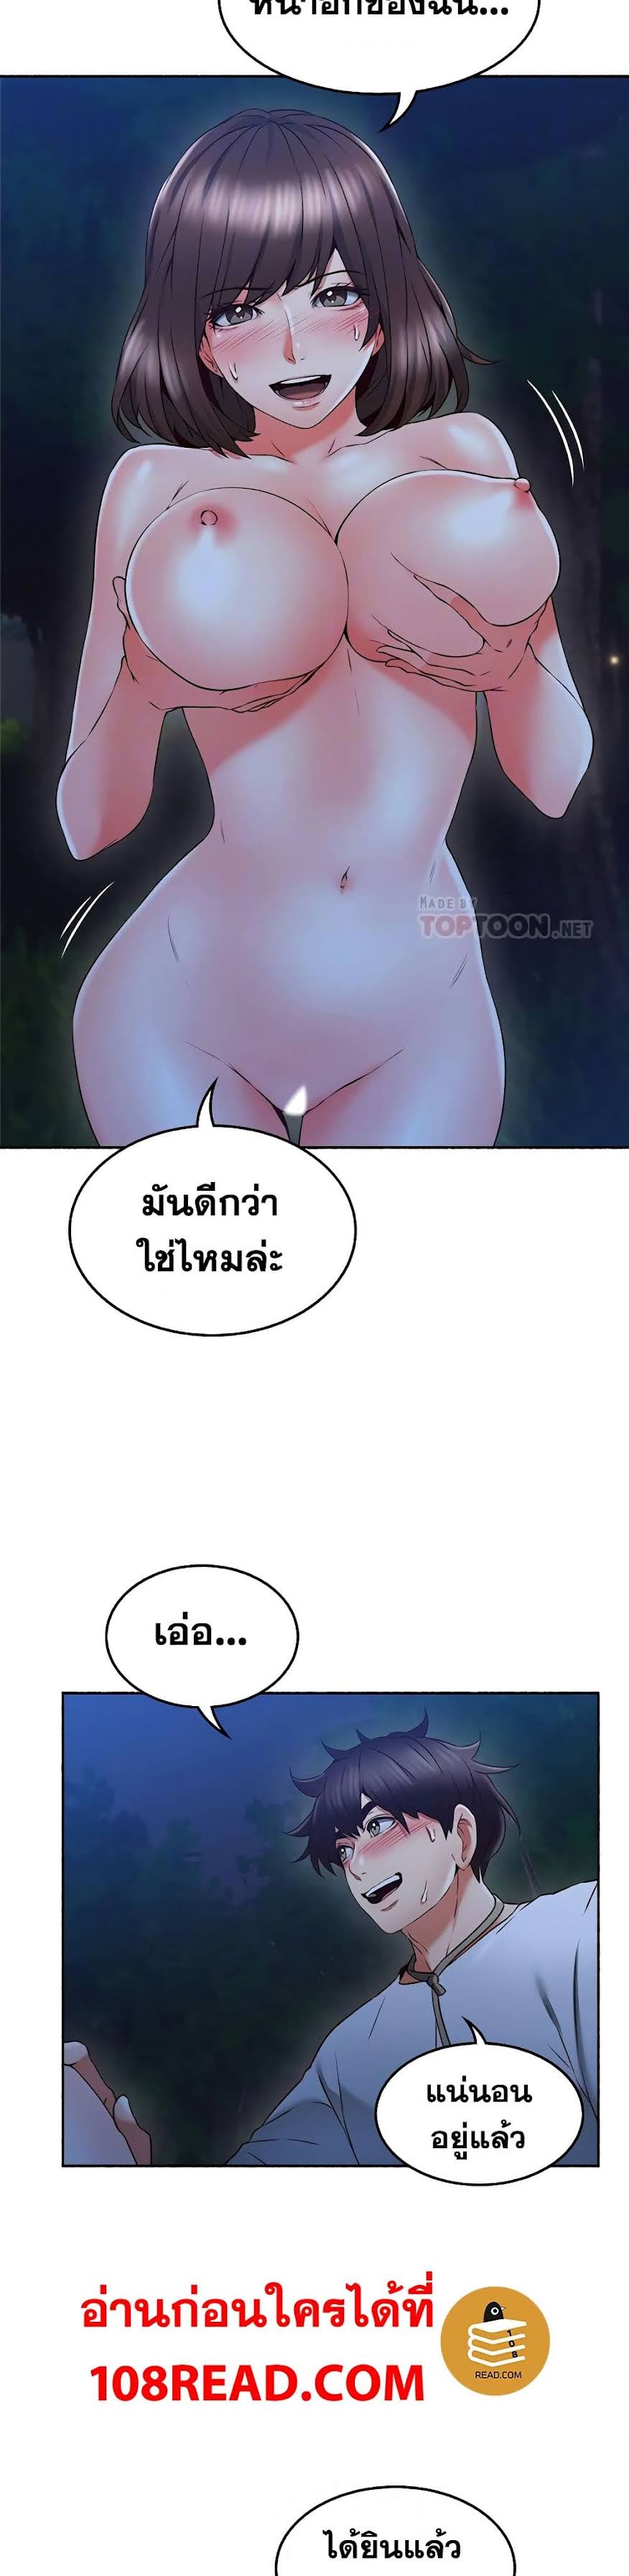 Soothe Me! - หน้า 5